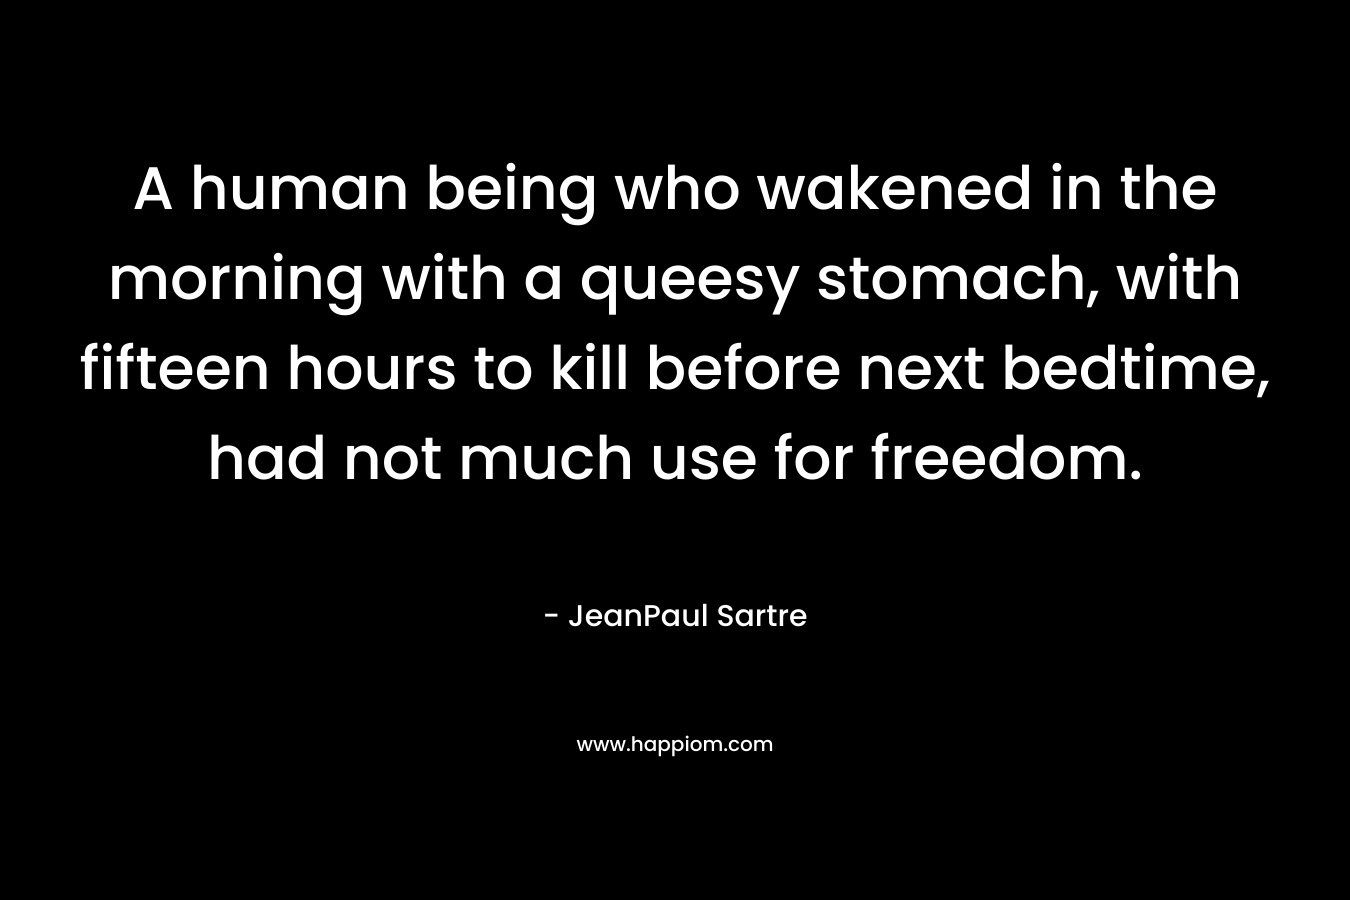 A human being who wakened in the morning with a queesy stomach, with fifteen hours to kill before next bedtime, had not much use for freedom.